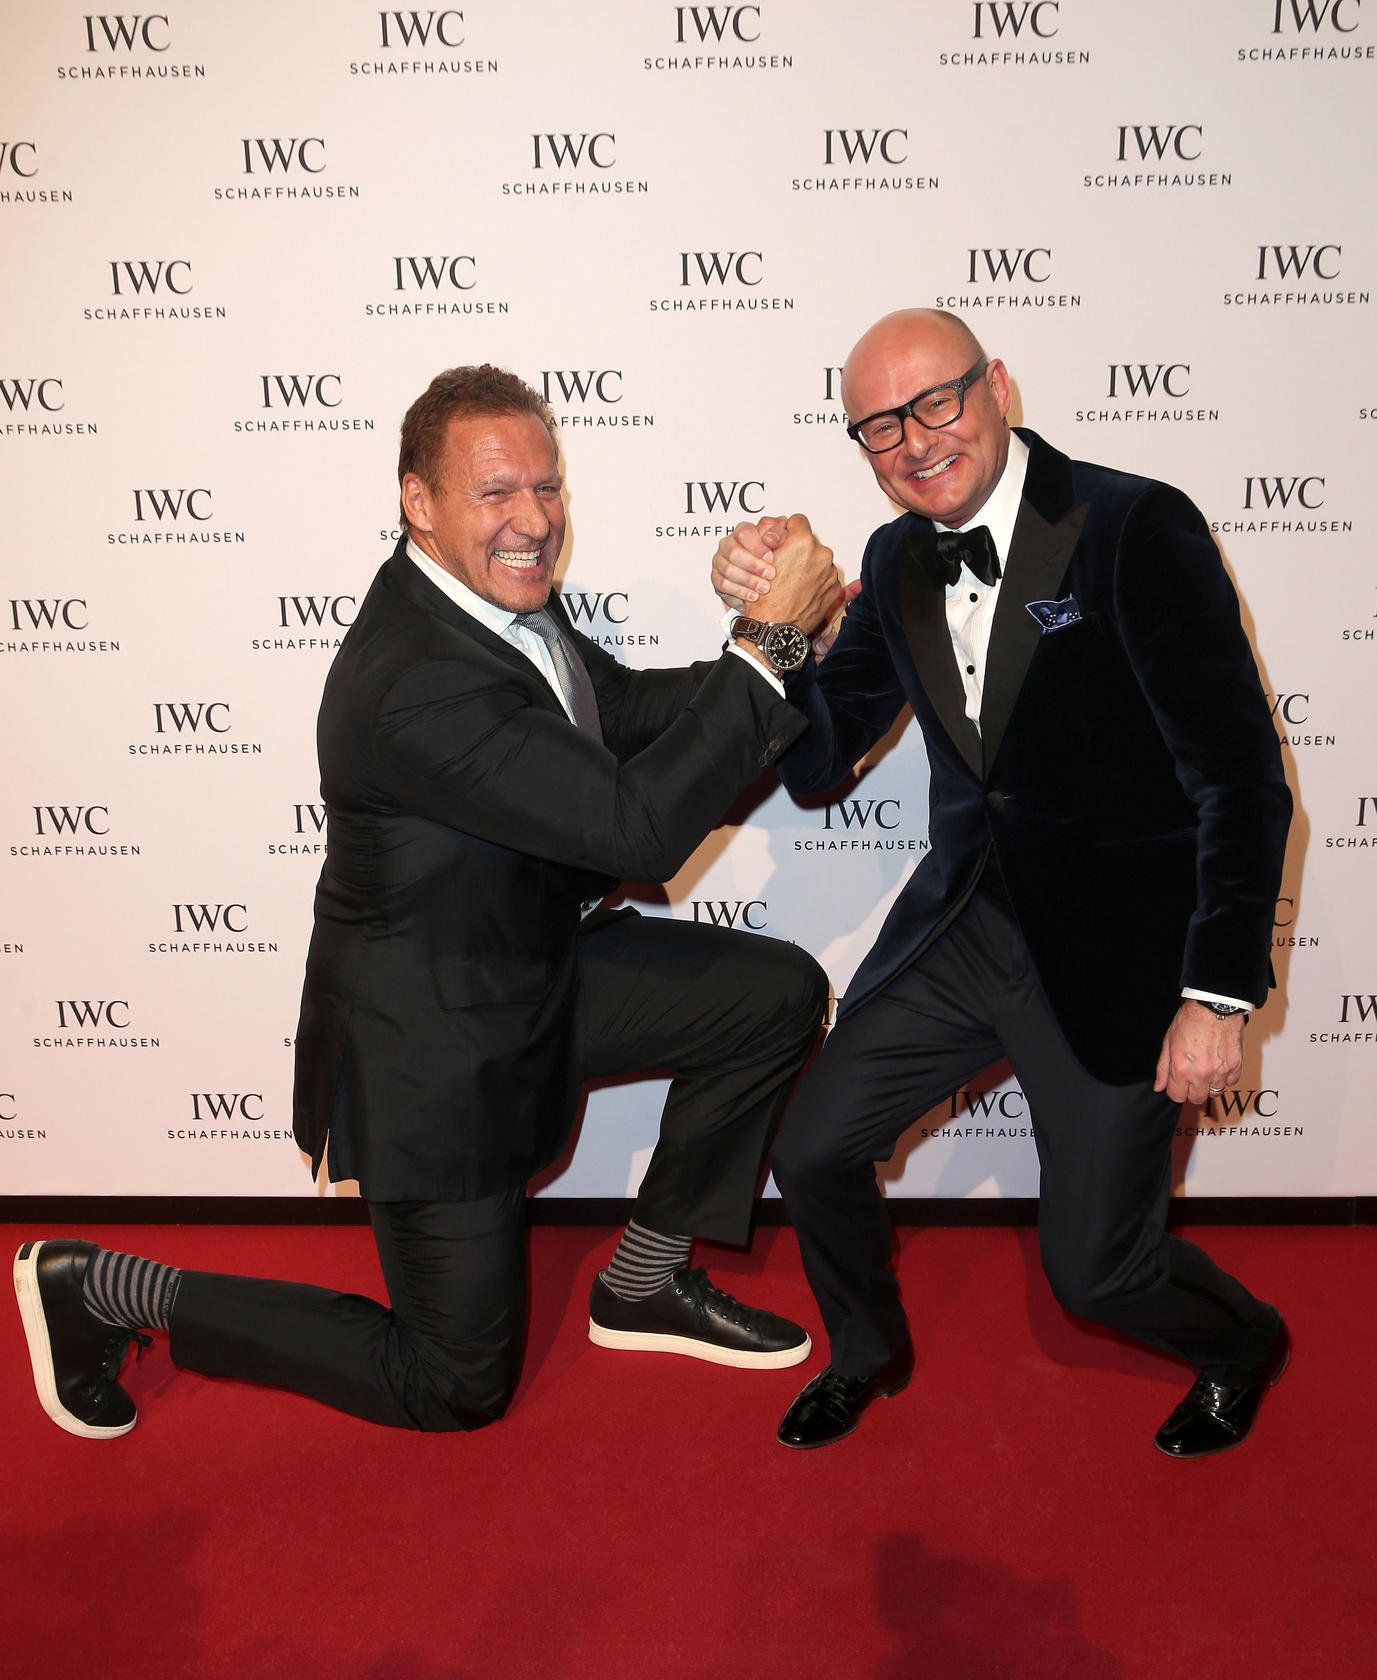 Ralf Moller and IWC CEO Georges Kern strike an interesting pose at the event #stylescmp